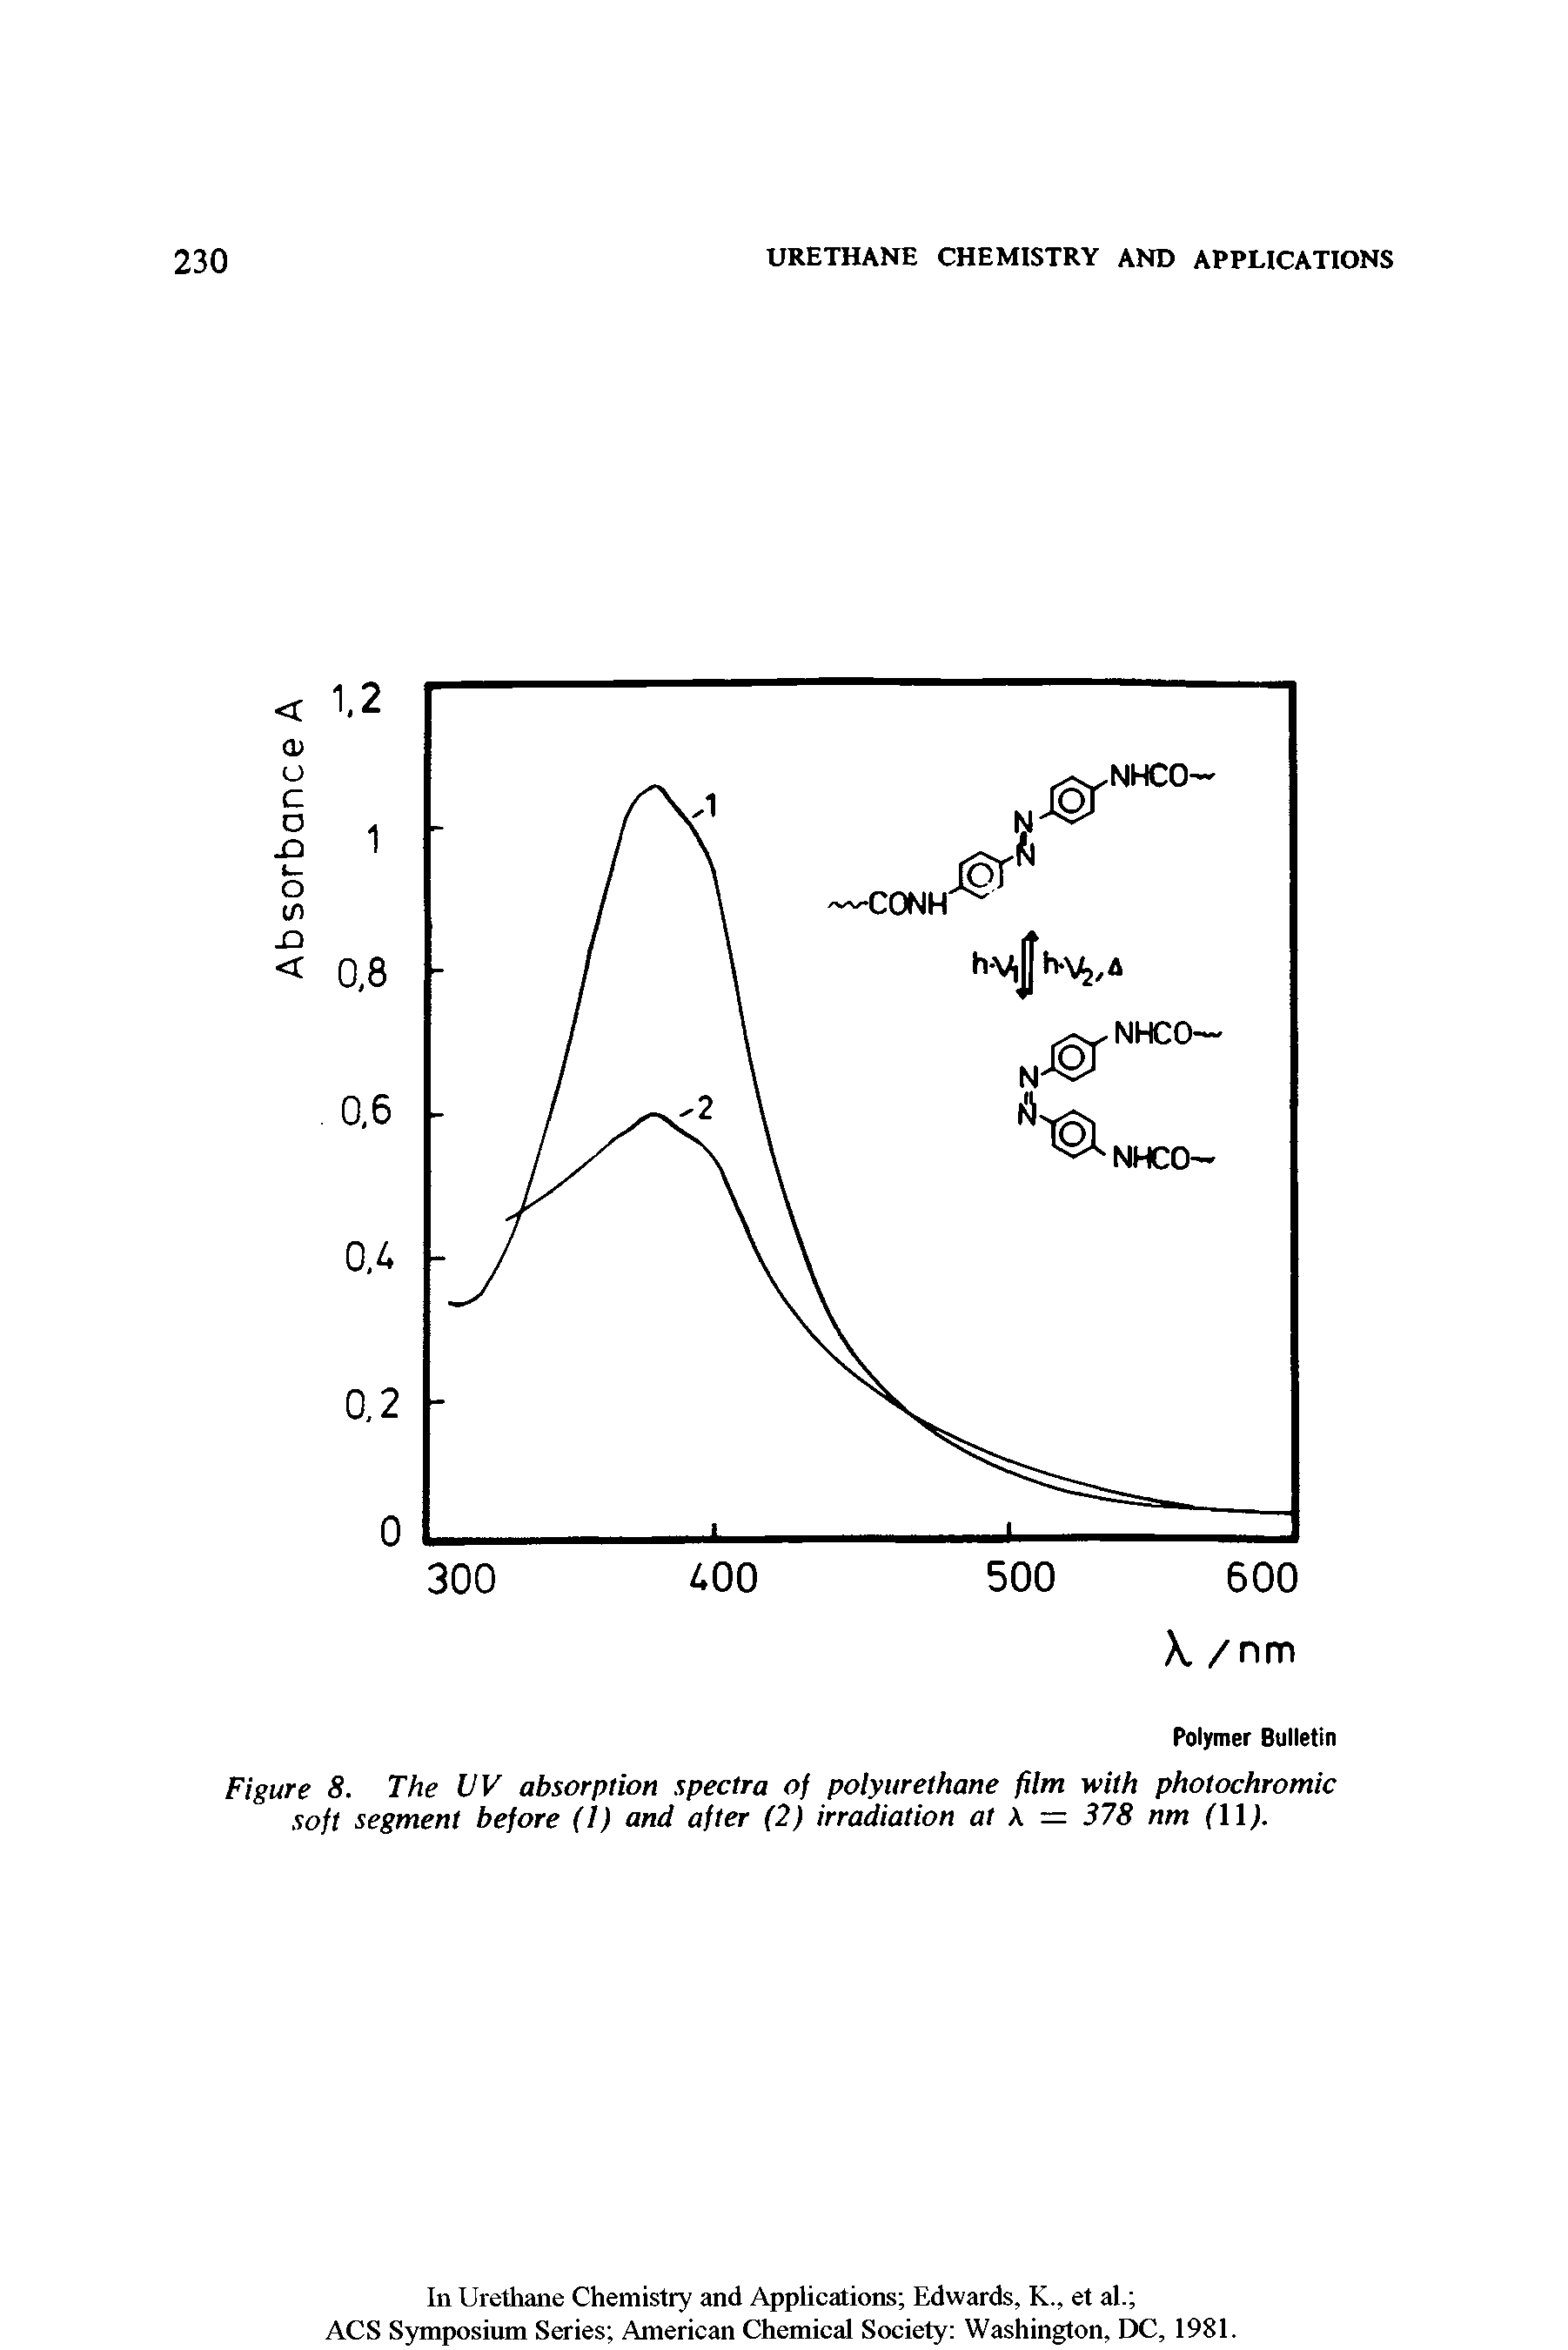 Figure 8. The UV absorption spectra of polyurethane film with photochromic soft segment before (I) and after (2) irradiation at A = 378 nm ( 1).